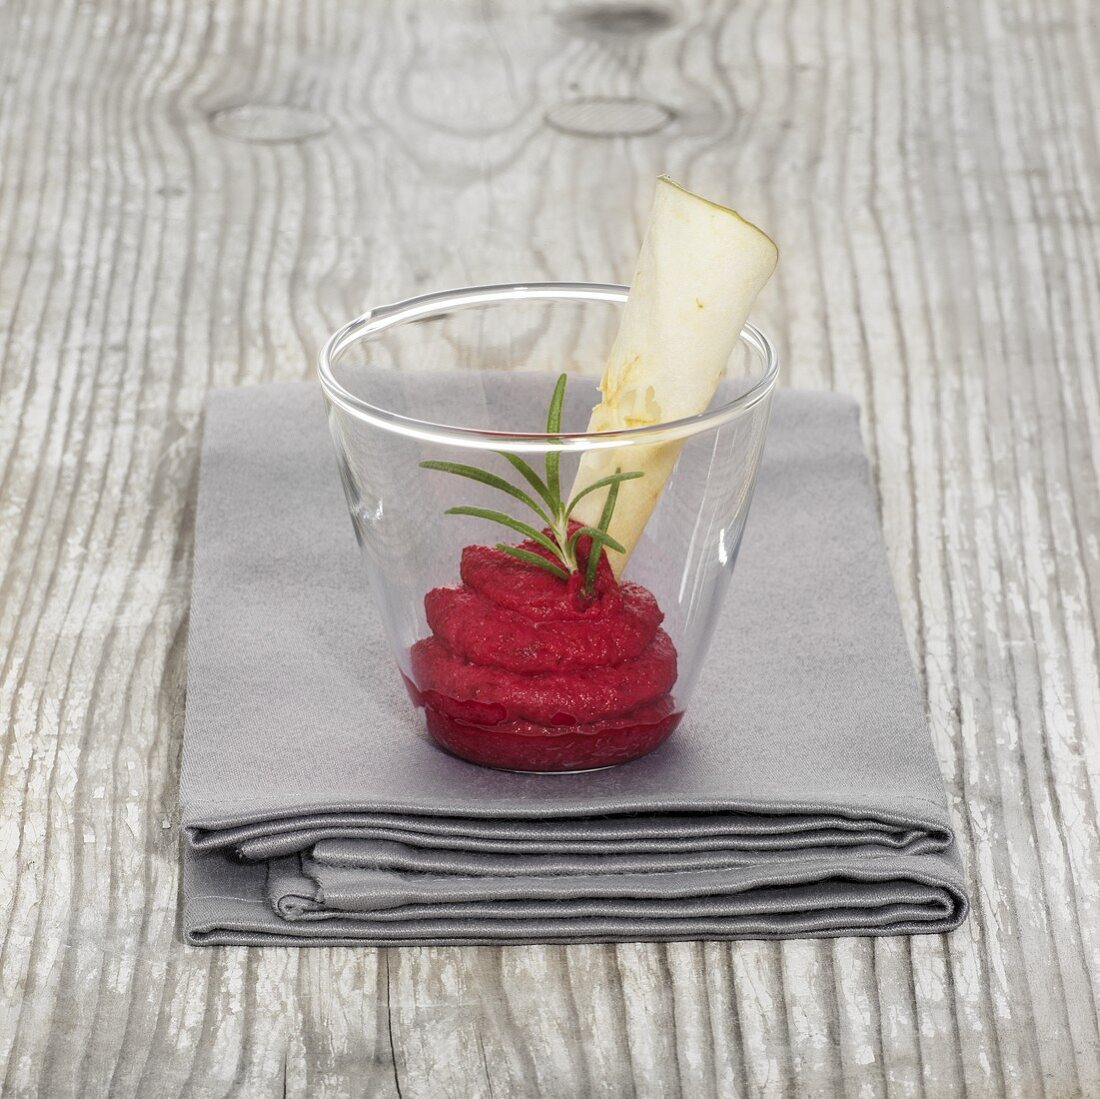 Beetroot mousse with rosemary in a glass